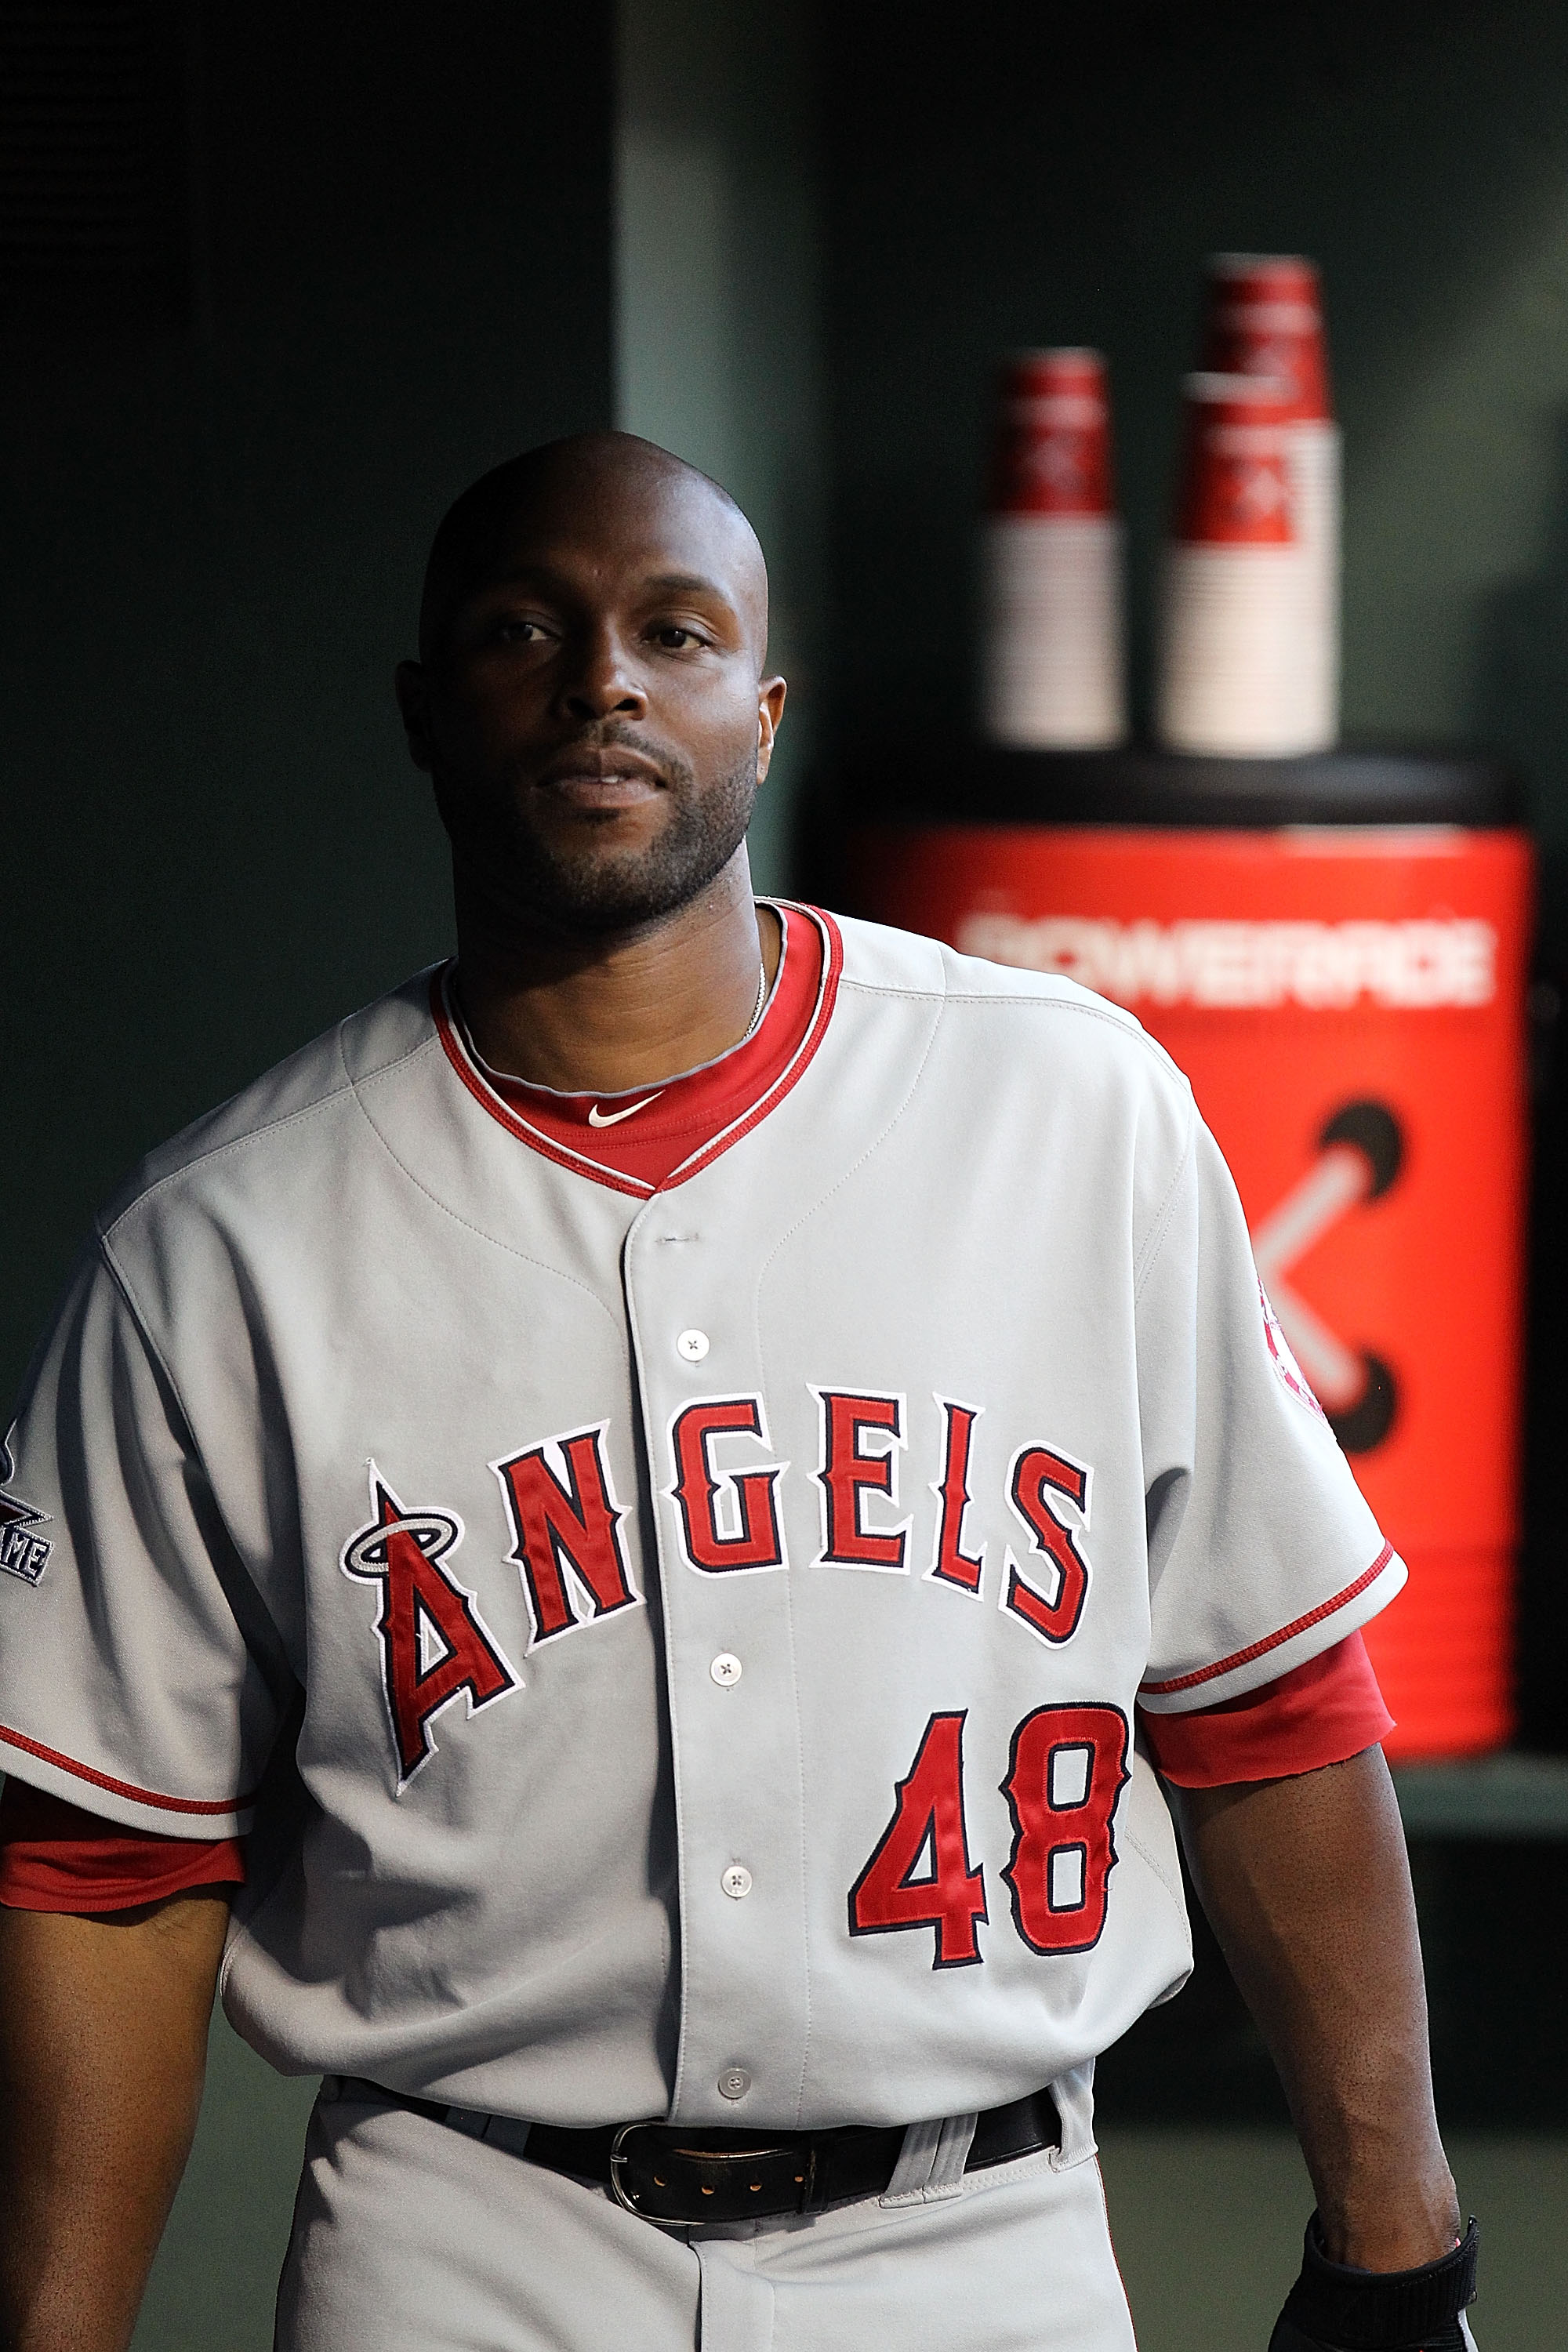 ANGELS Franchise Jersey Roster #44 - Halos Heaven